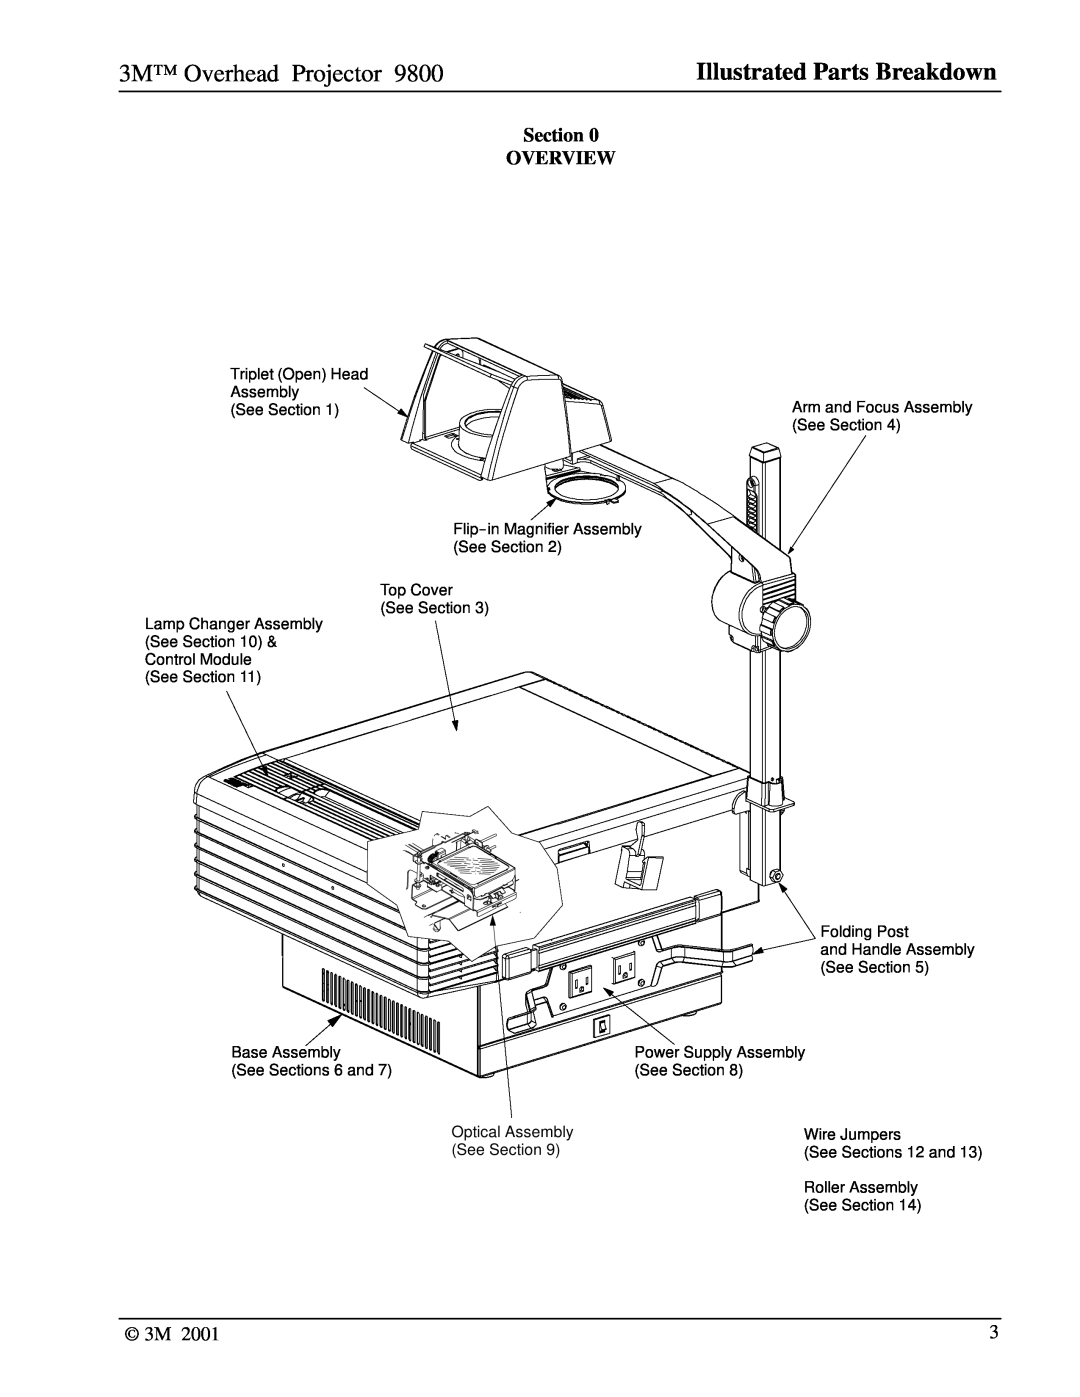 3M 9800 manual Section OVERVIEW, 3M Overhead Projector, Illustrated Parts Breakdown, See Sections 12 and 